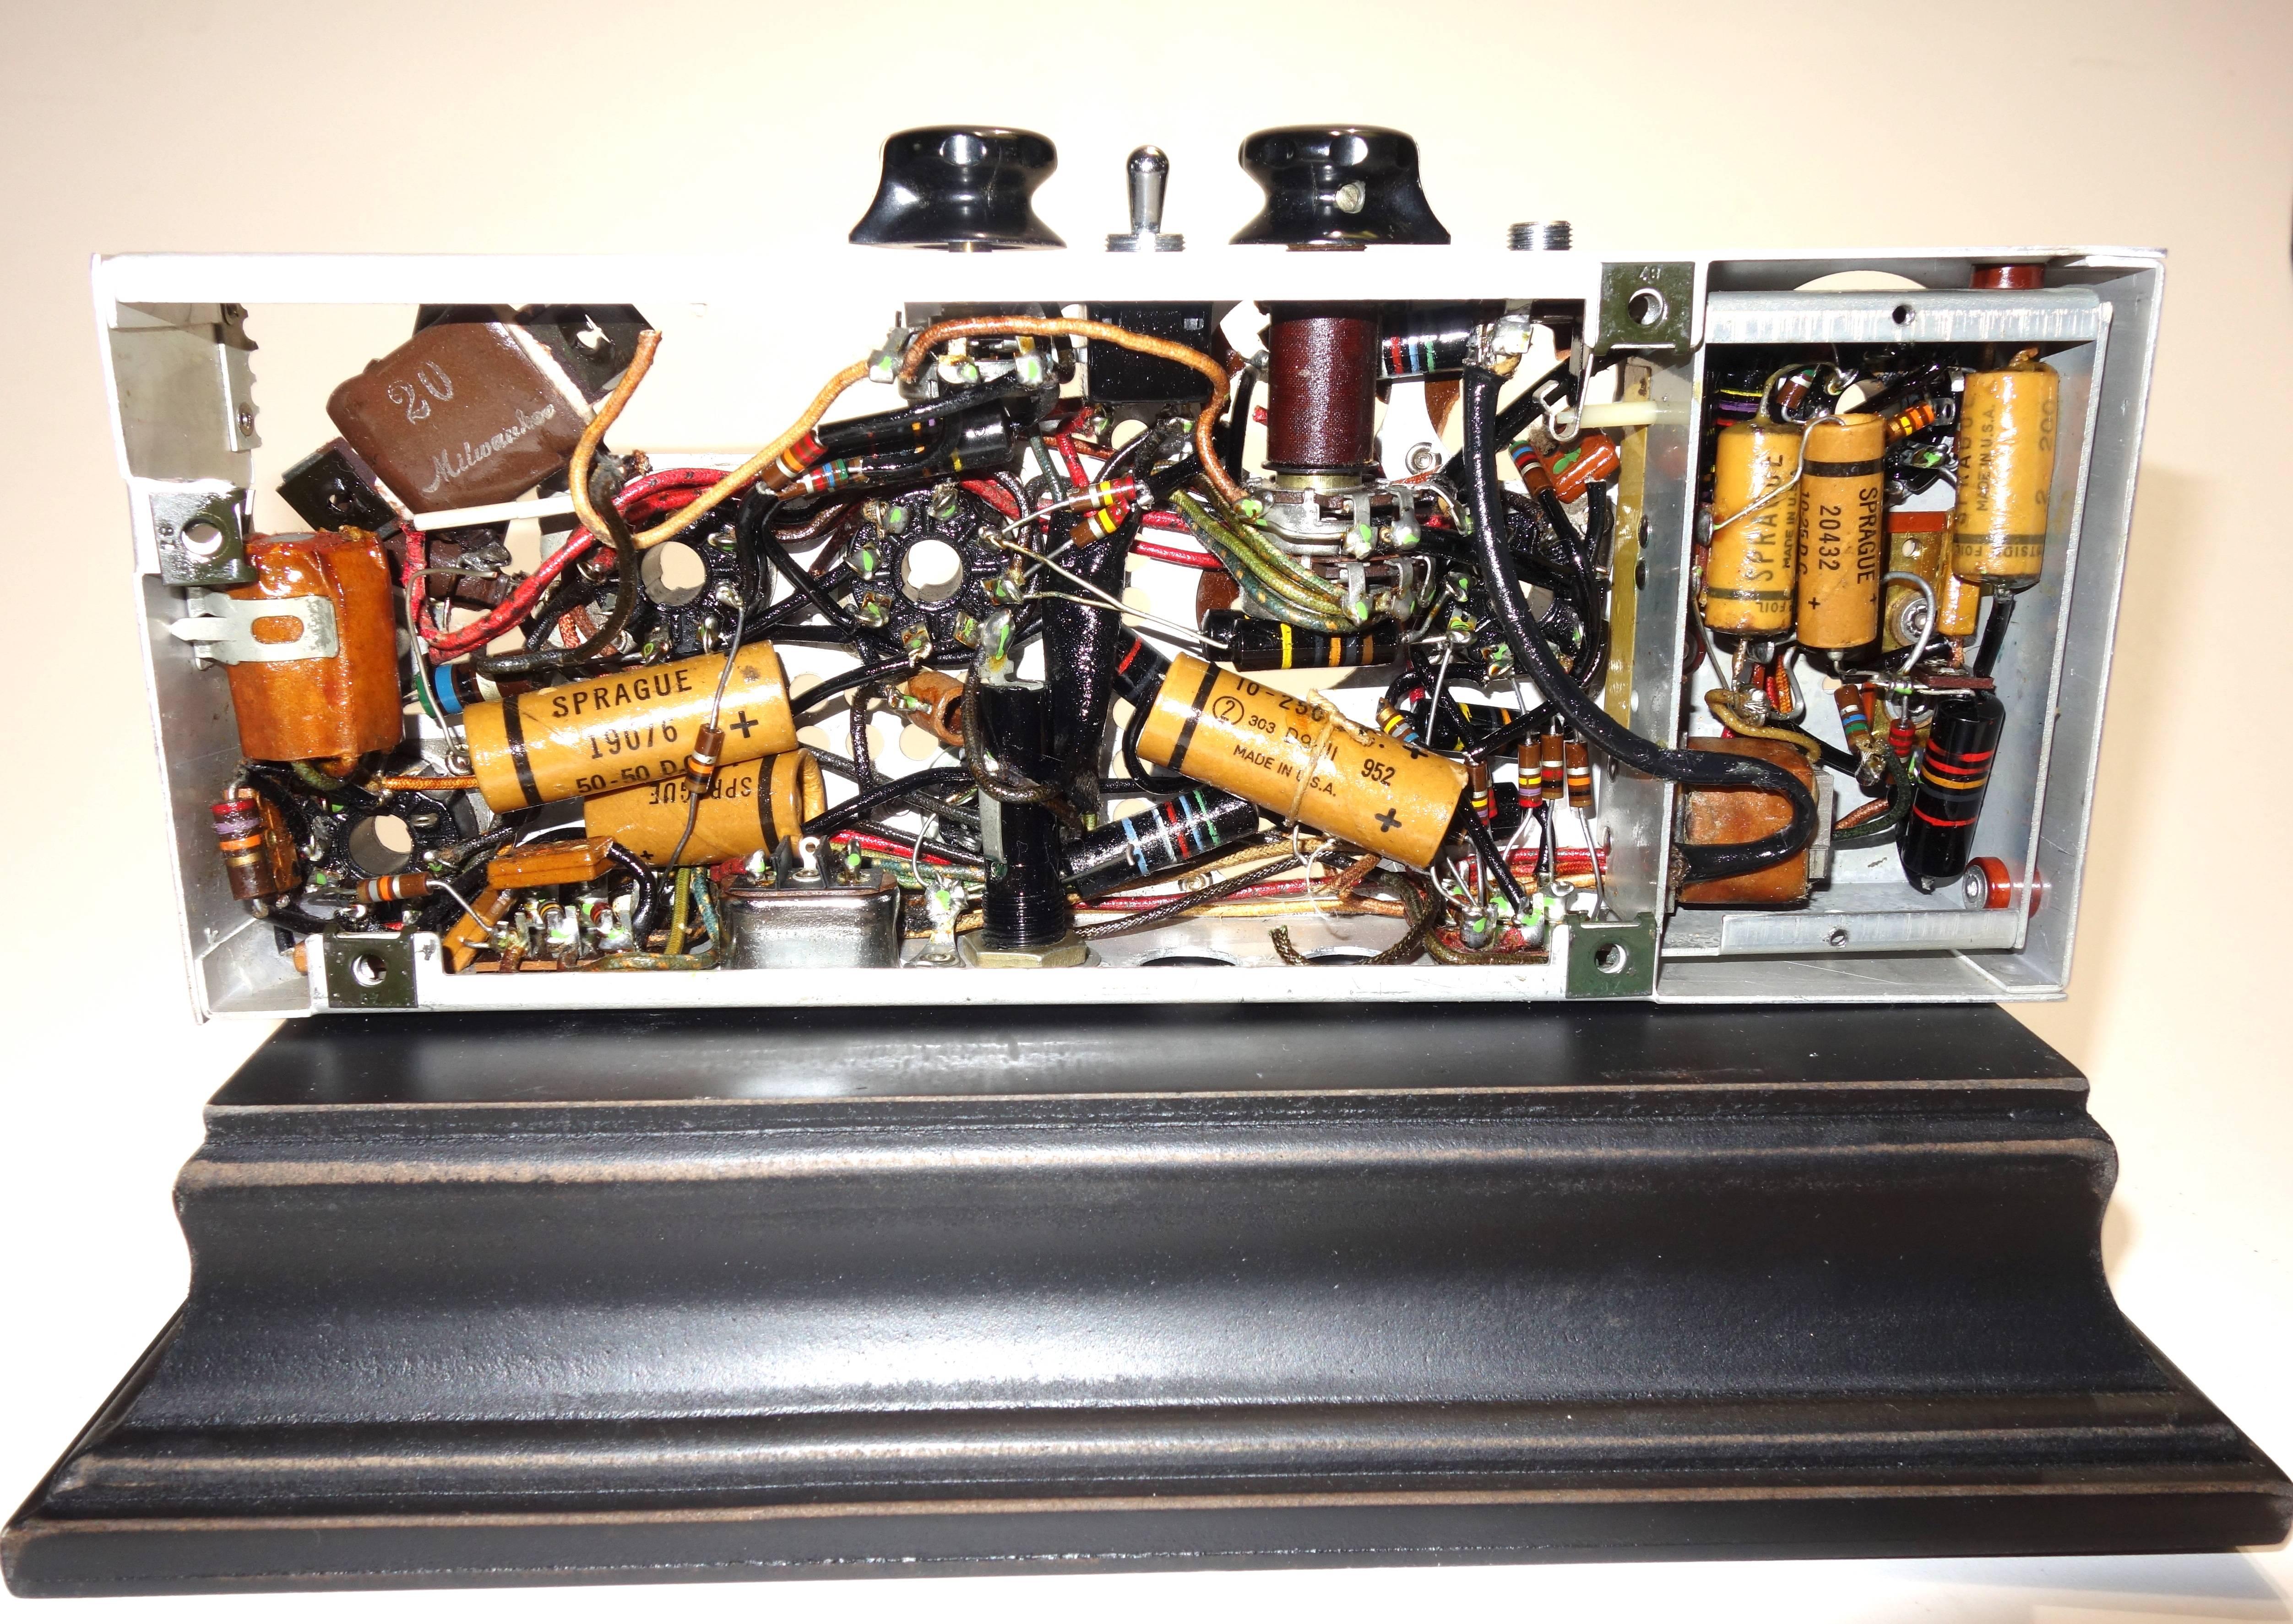 Submitted for your approval is this circa mid-20th century circuit electronic array artifact from a primitive professional movie projector. Mounted on a wood display stand, as sculpture by Bill Reiter. All American made components and offered as a